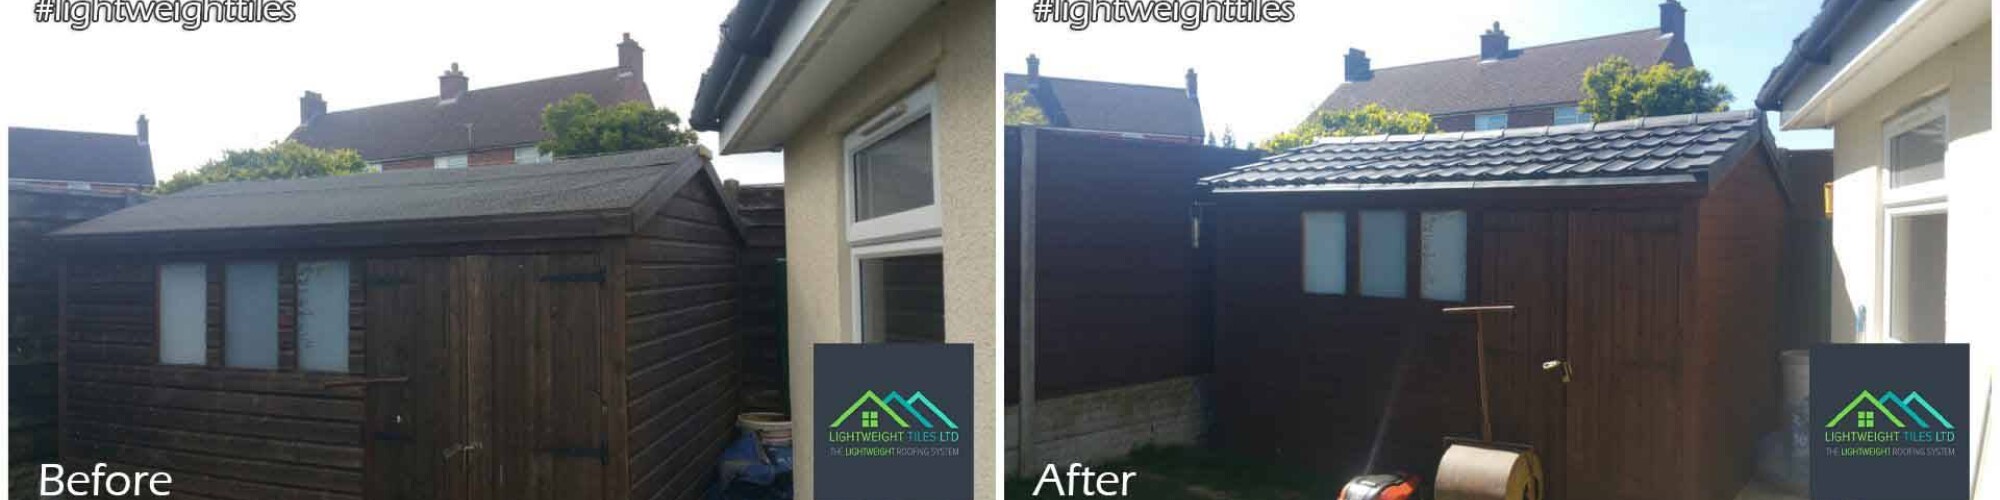 Before and After images of Shed roof Replacement tiles by Lightweight tiles